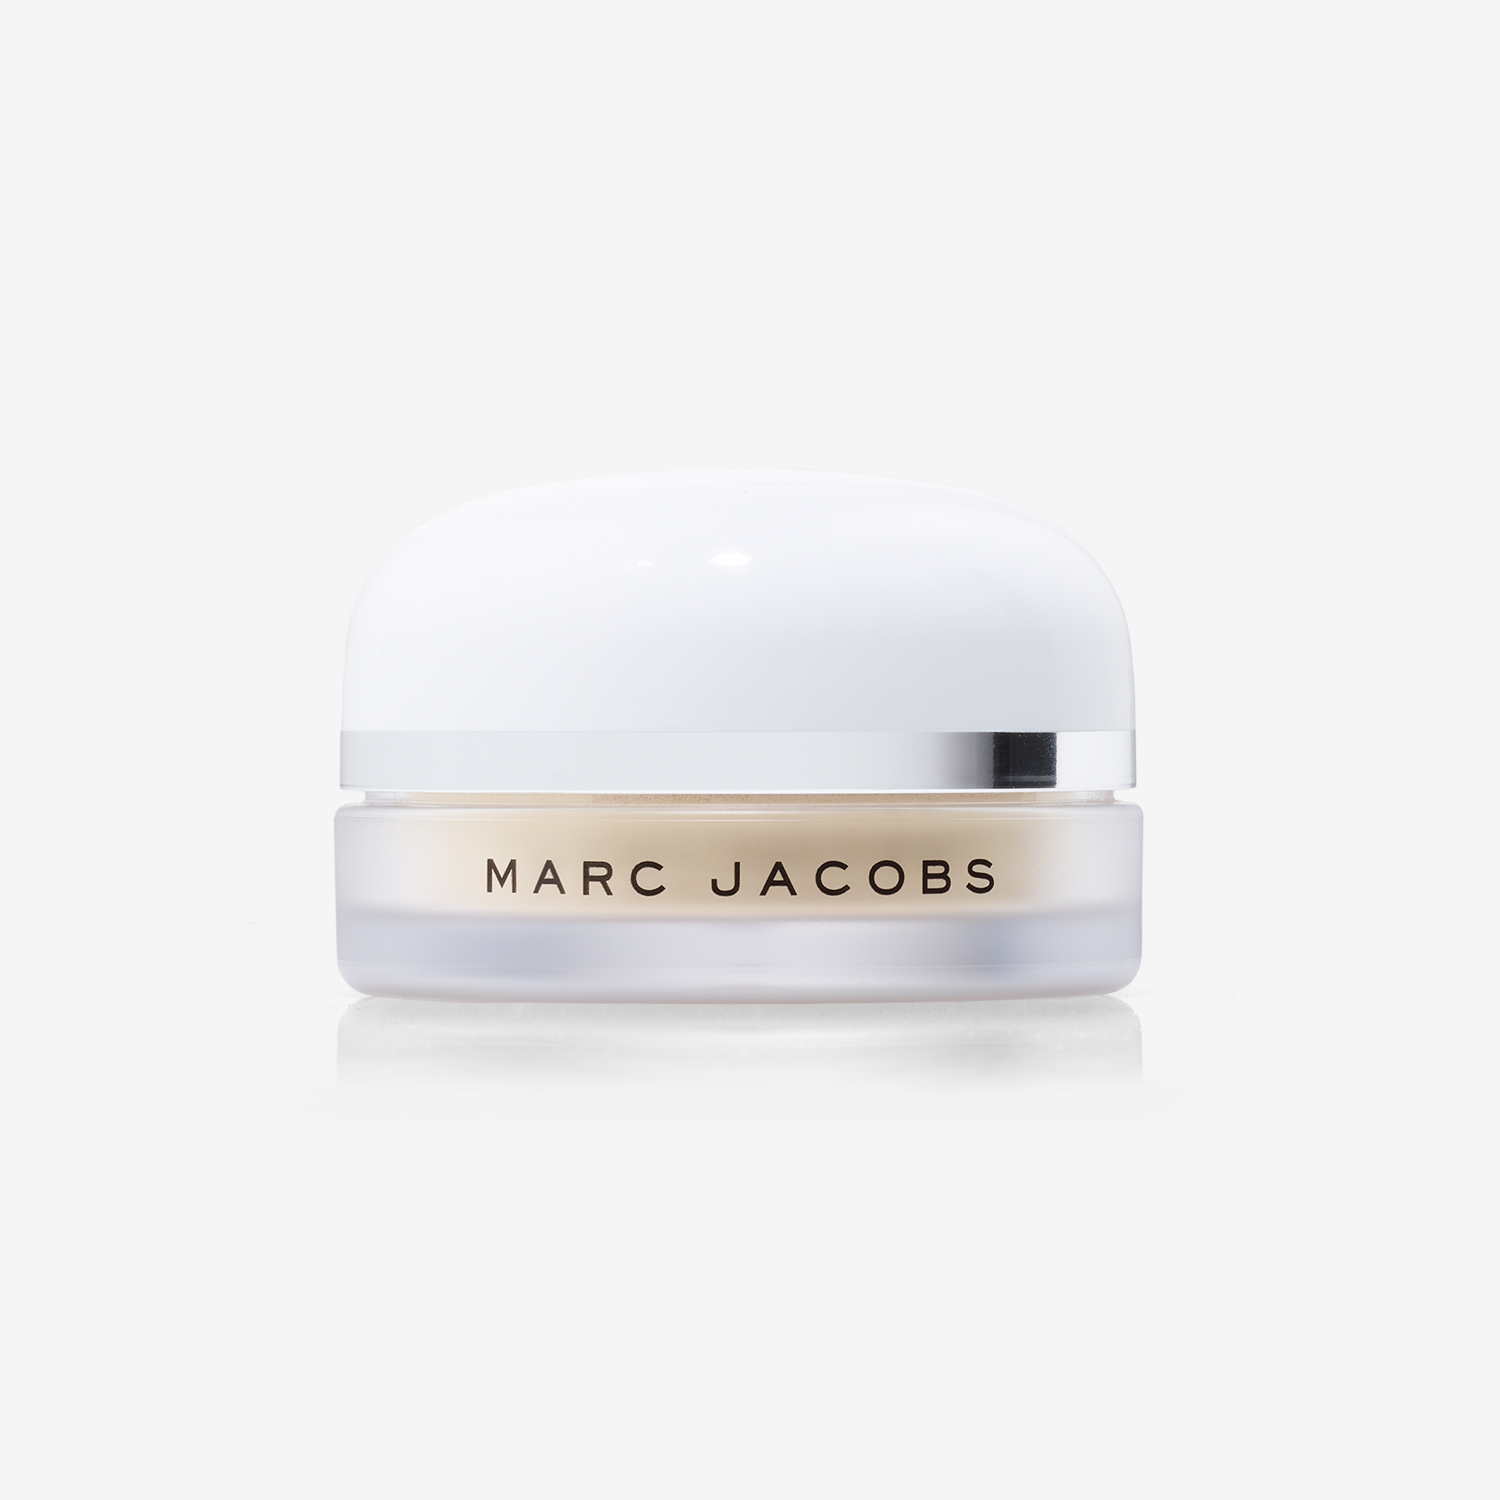 Marc Jacobs Beauty Finish-Line Perfecting Coconut Setting Powder, 